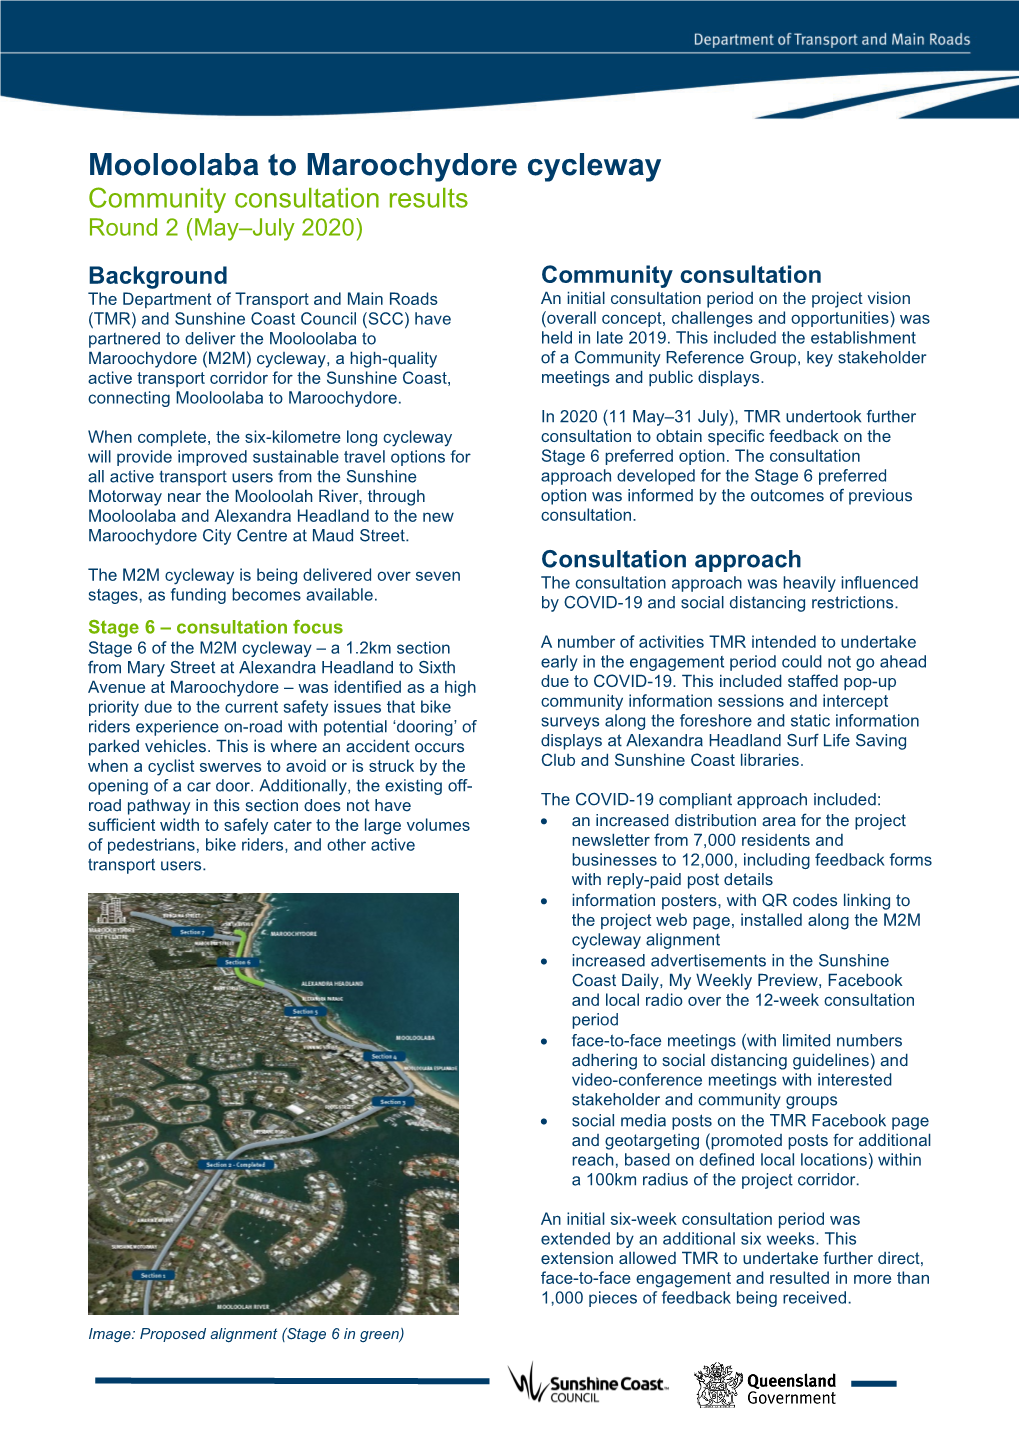 Mooloolaba to Maroochydore Cycleway Community Consultation Results Round 2 (May–July 2020)